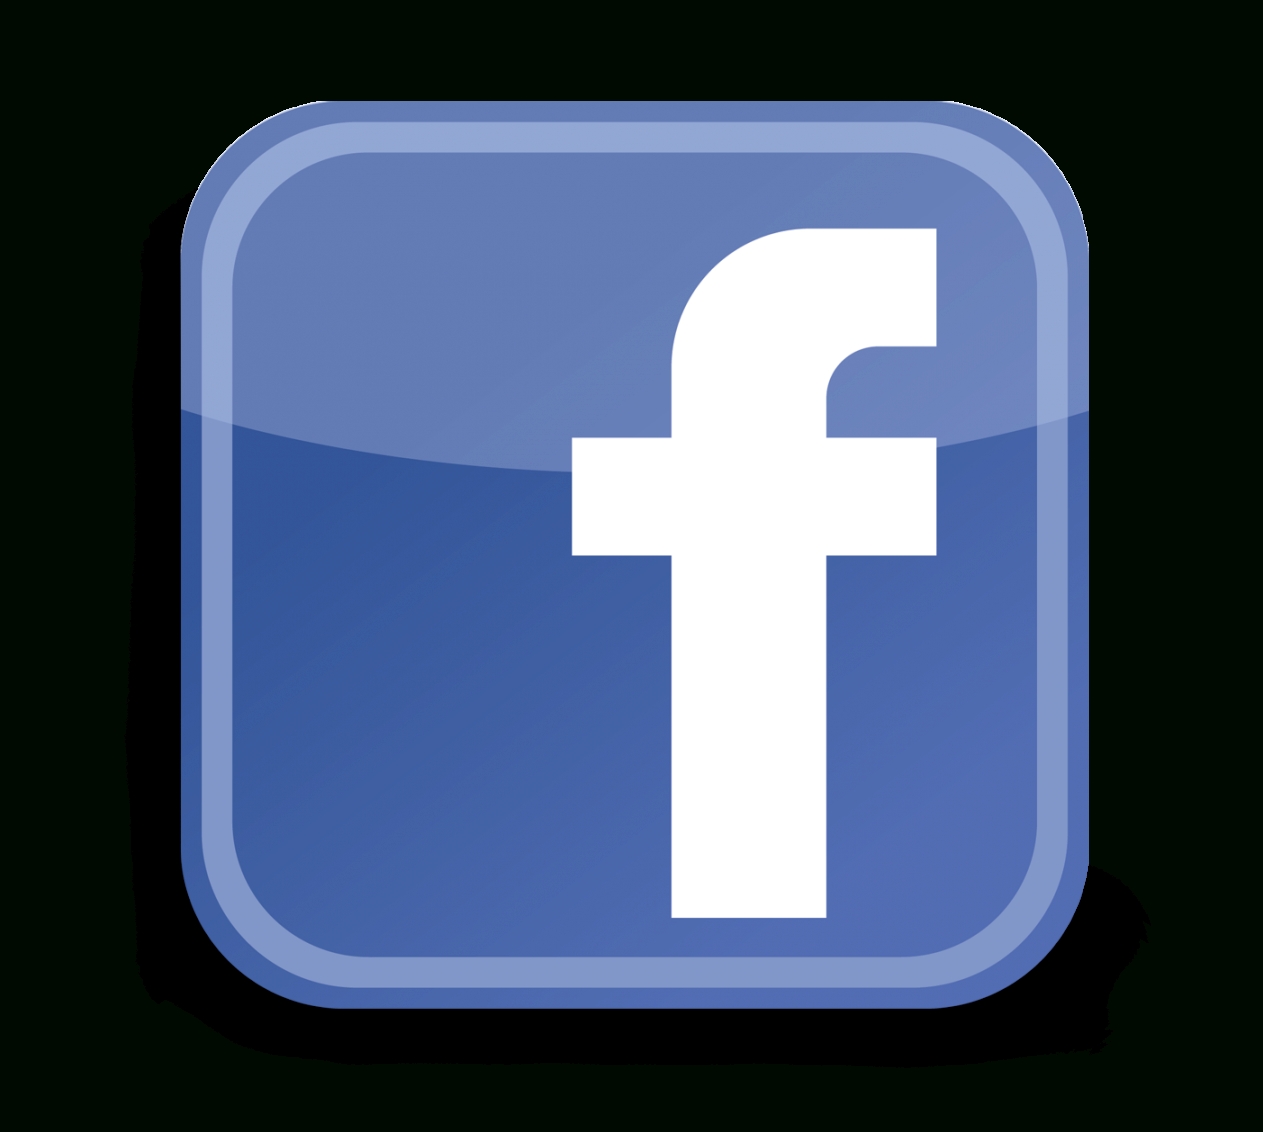 Facebook Logo Png U2013 Free Icons And Png Backgrounds4 - Facebook, Transparent background PNG HD thumbnail